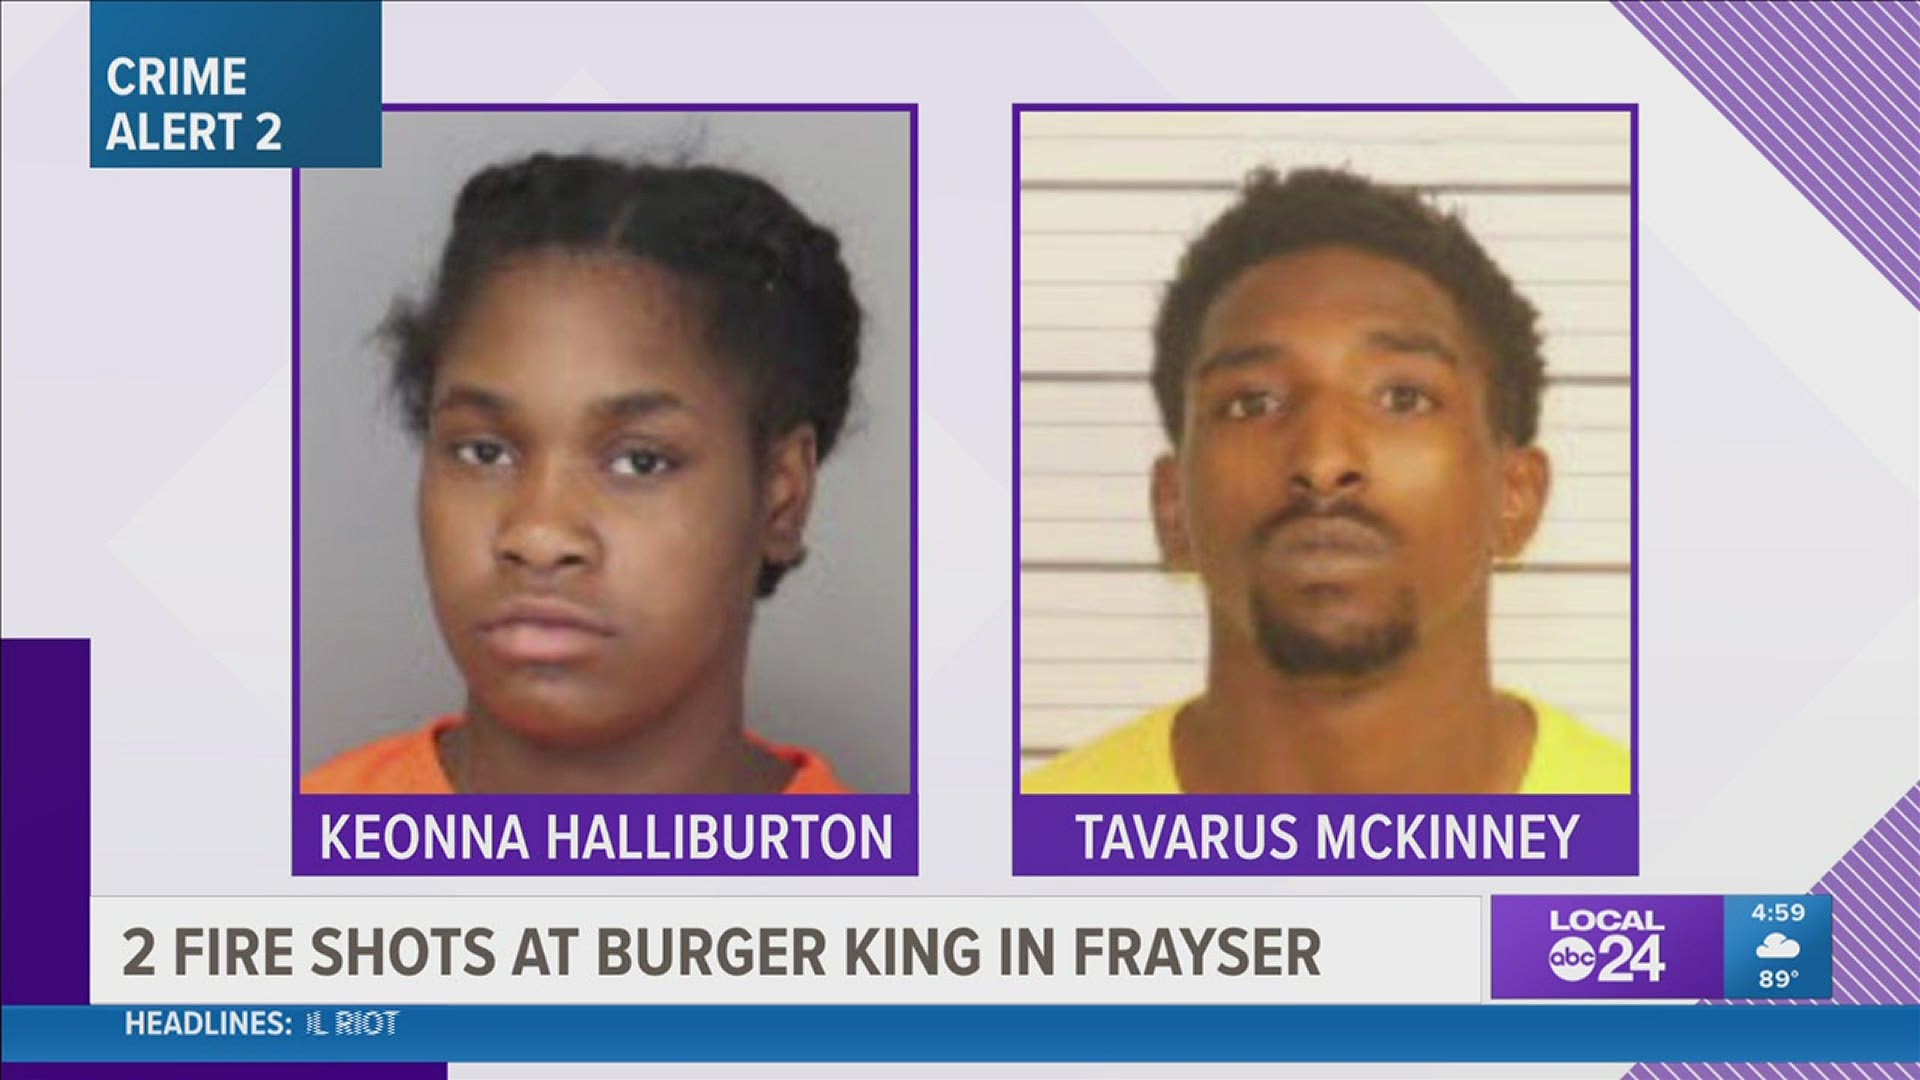 Memphis Police said the woman got into a fight with workers at a Burger King, then she and the man returned and fired shots into the parking lot, injuring 2 people.